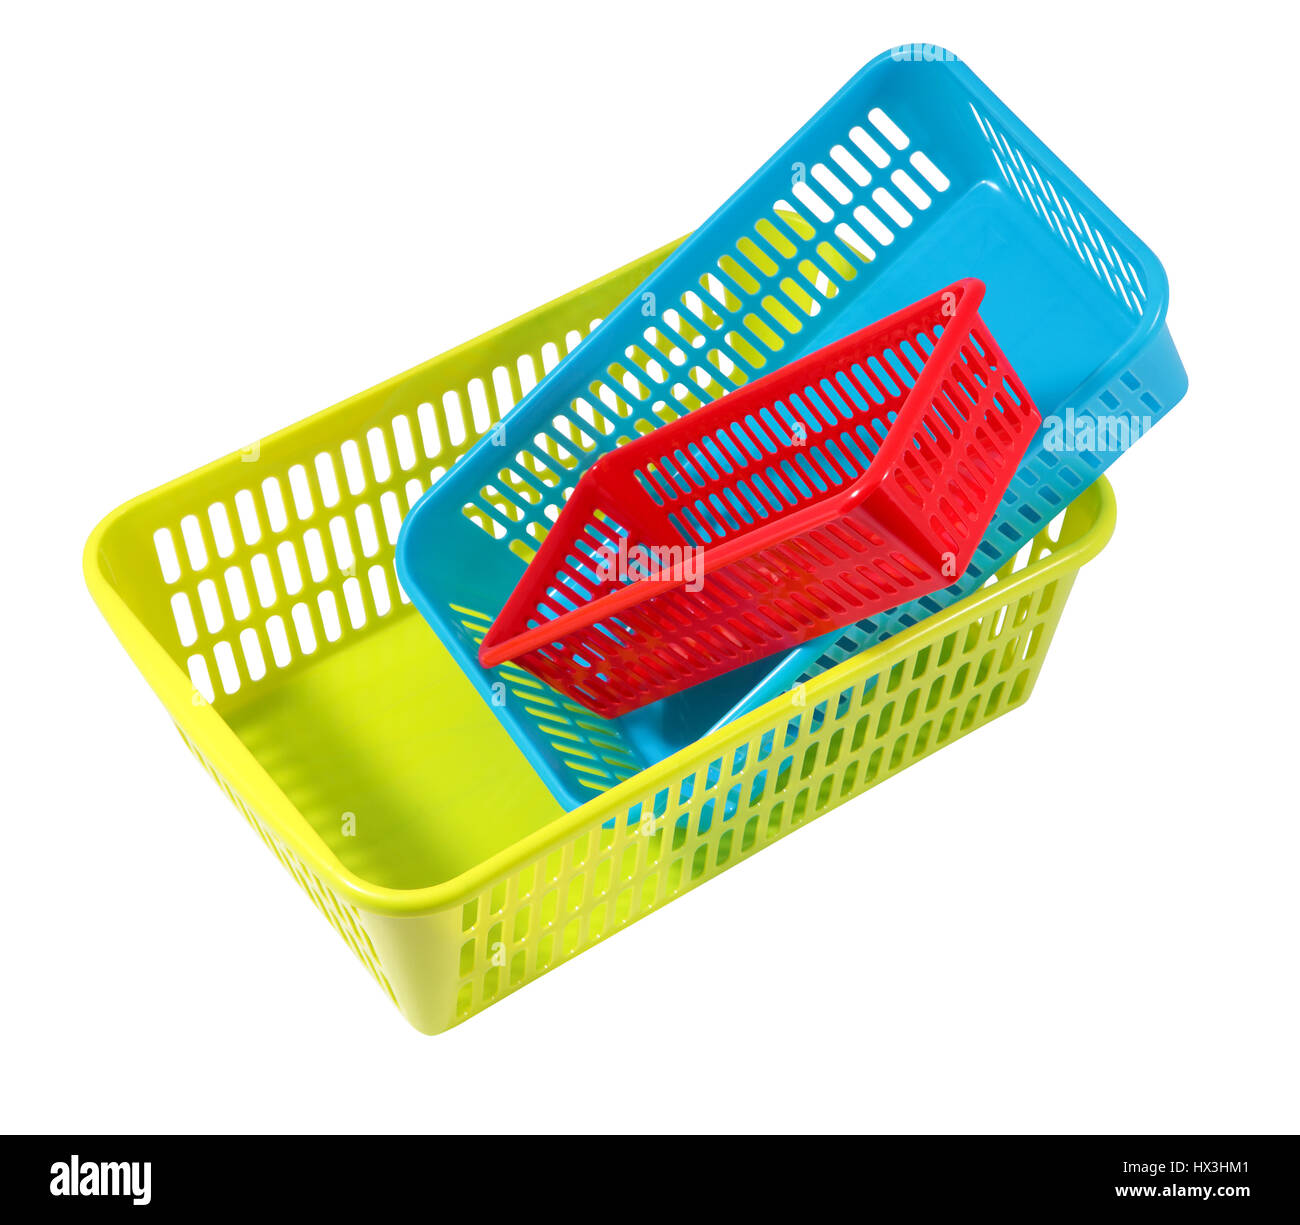 https://c8.alamy.com/comp/HX3HM1/plastic-household-articles-colored-containers-of-different-sizes-three-HX3HM1.jpg